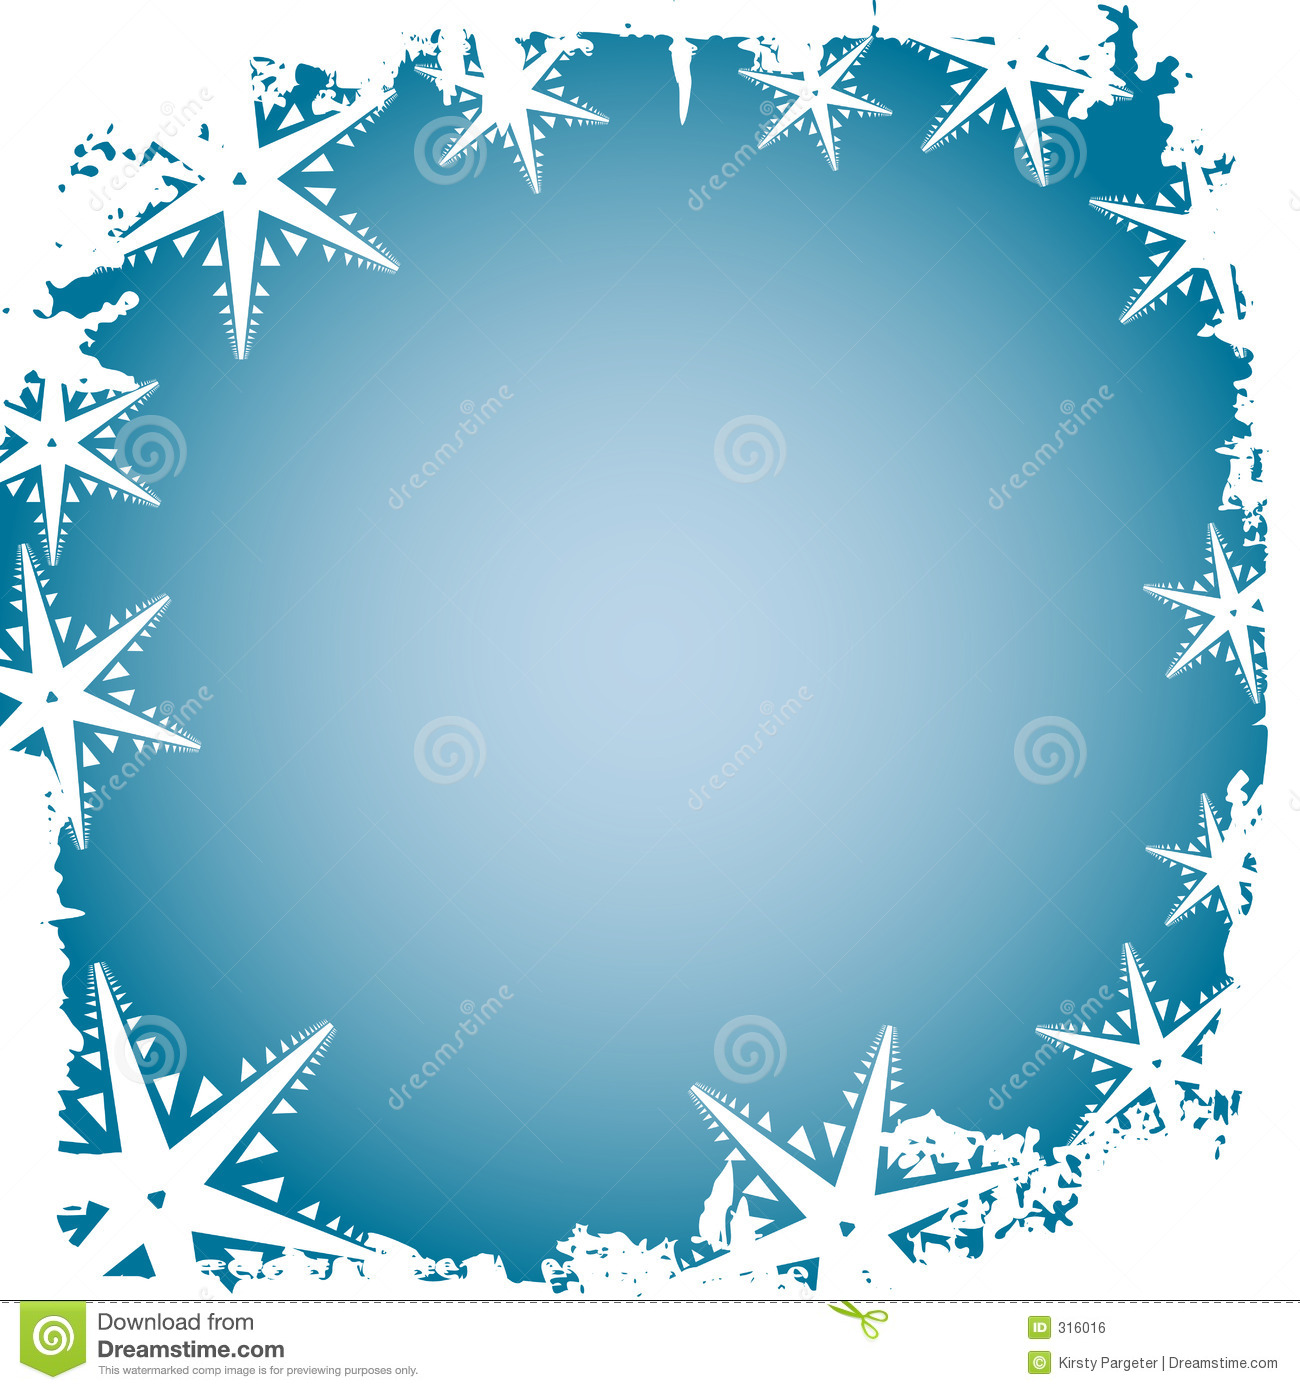 There Is 34 Icicle Border   Free Cliparts All Used For Free